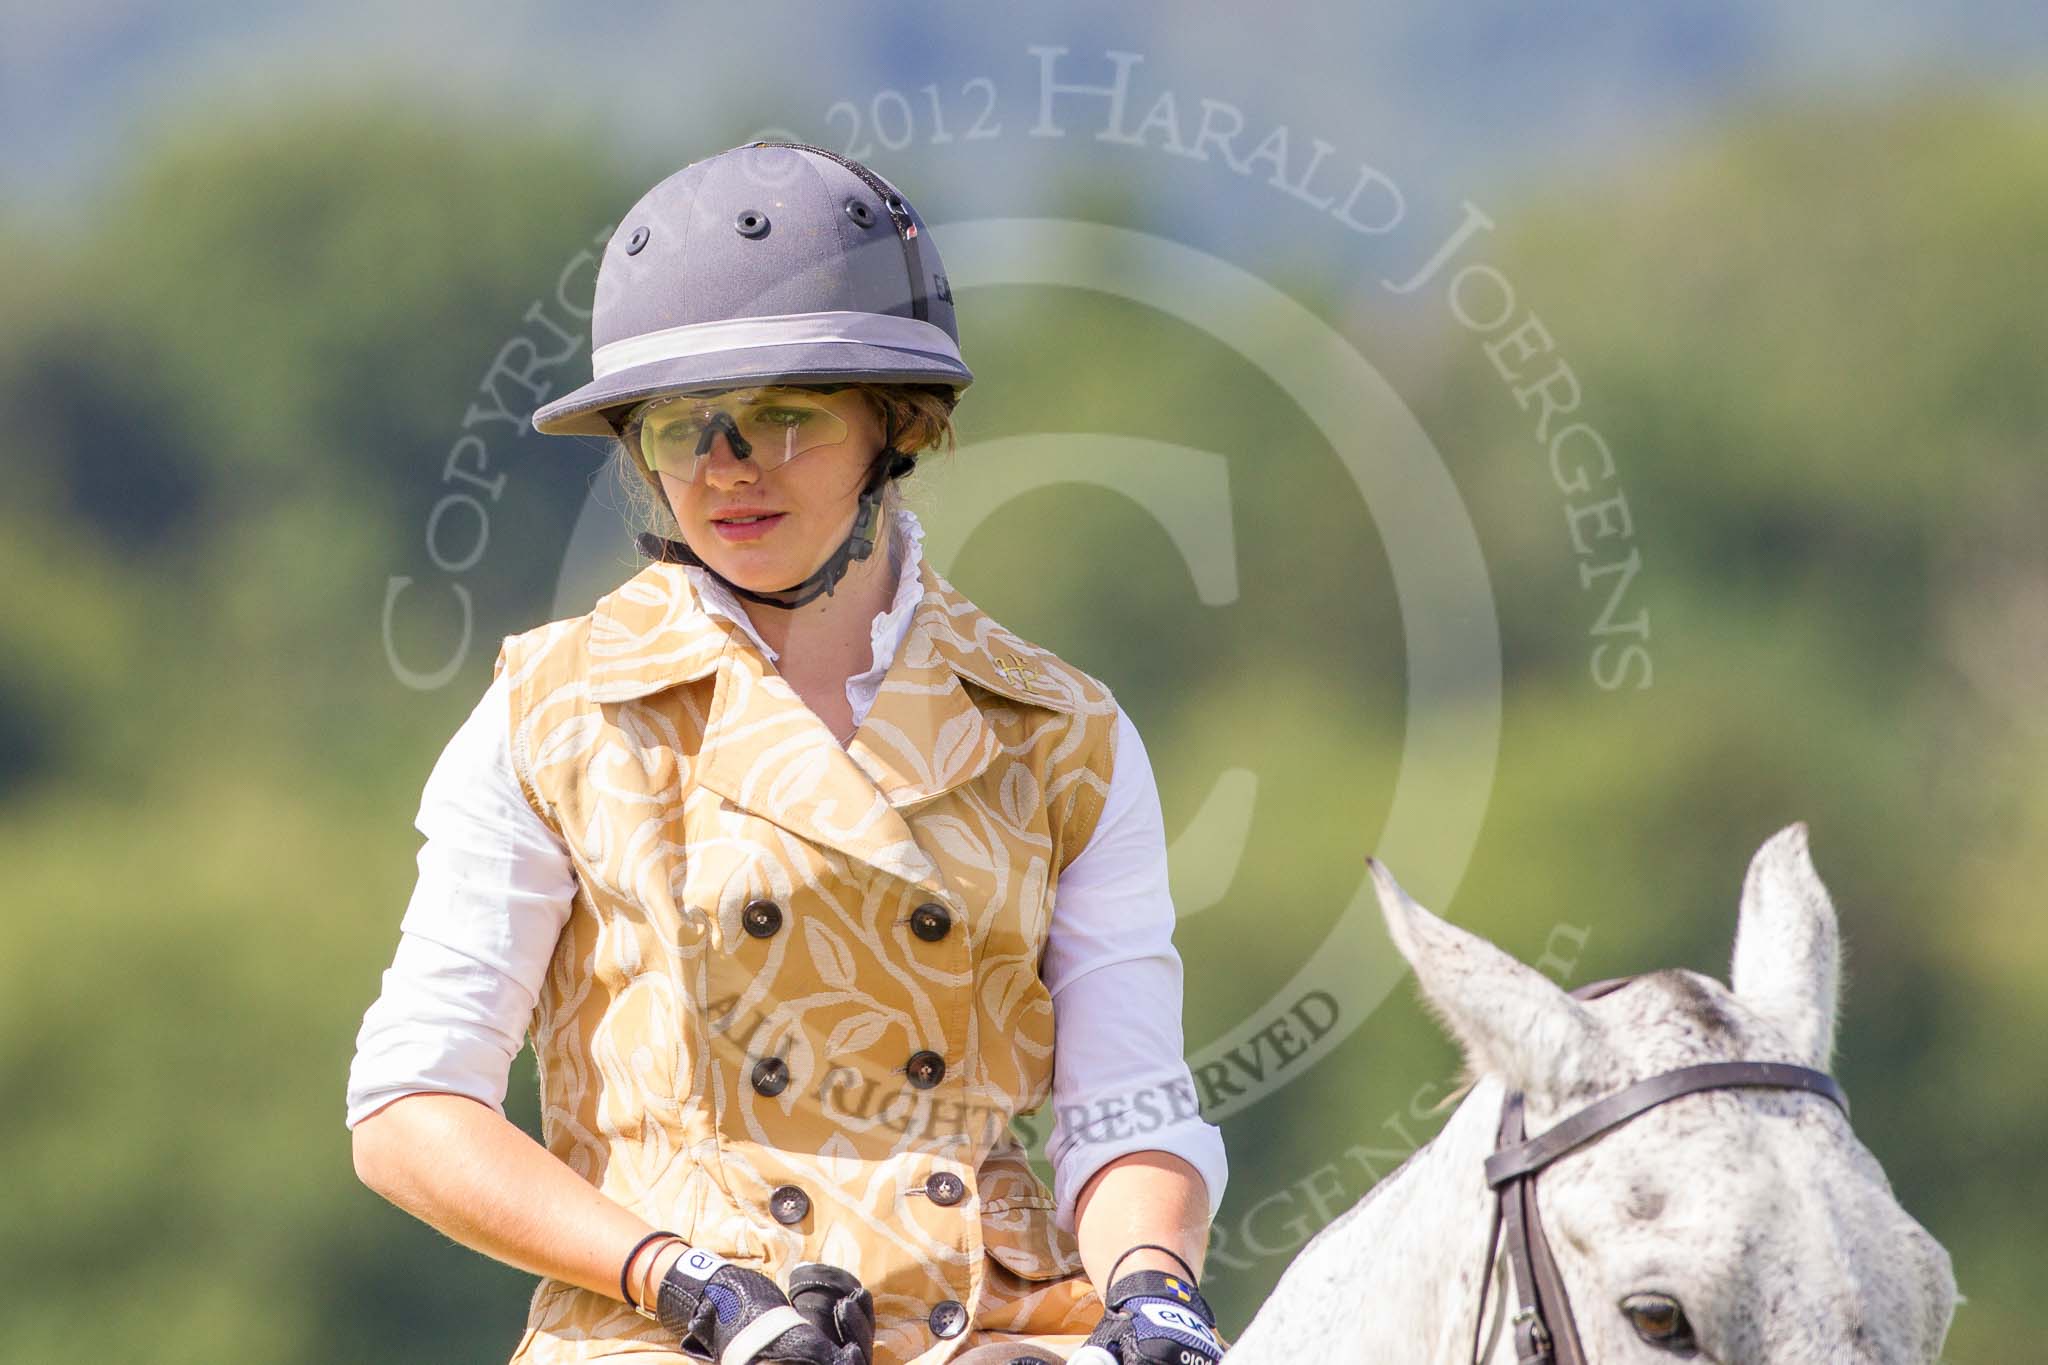 7th Heritage Polo Cup finals: Emma Boers, The Amazons of Polo Team sponsored by Polistas..
Hurtwood Park Polo Club,
Ewhurst Green,
Surrey,
United Kingdom,
on 05 August 2012 at 15:05, image #122